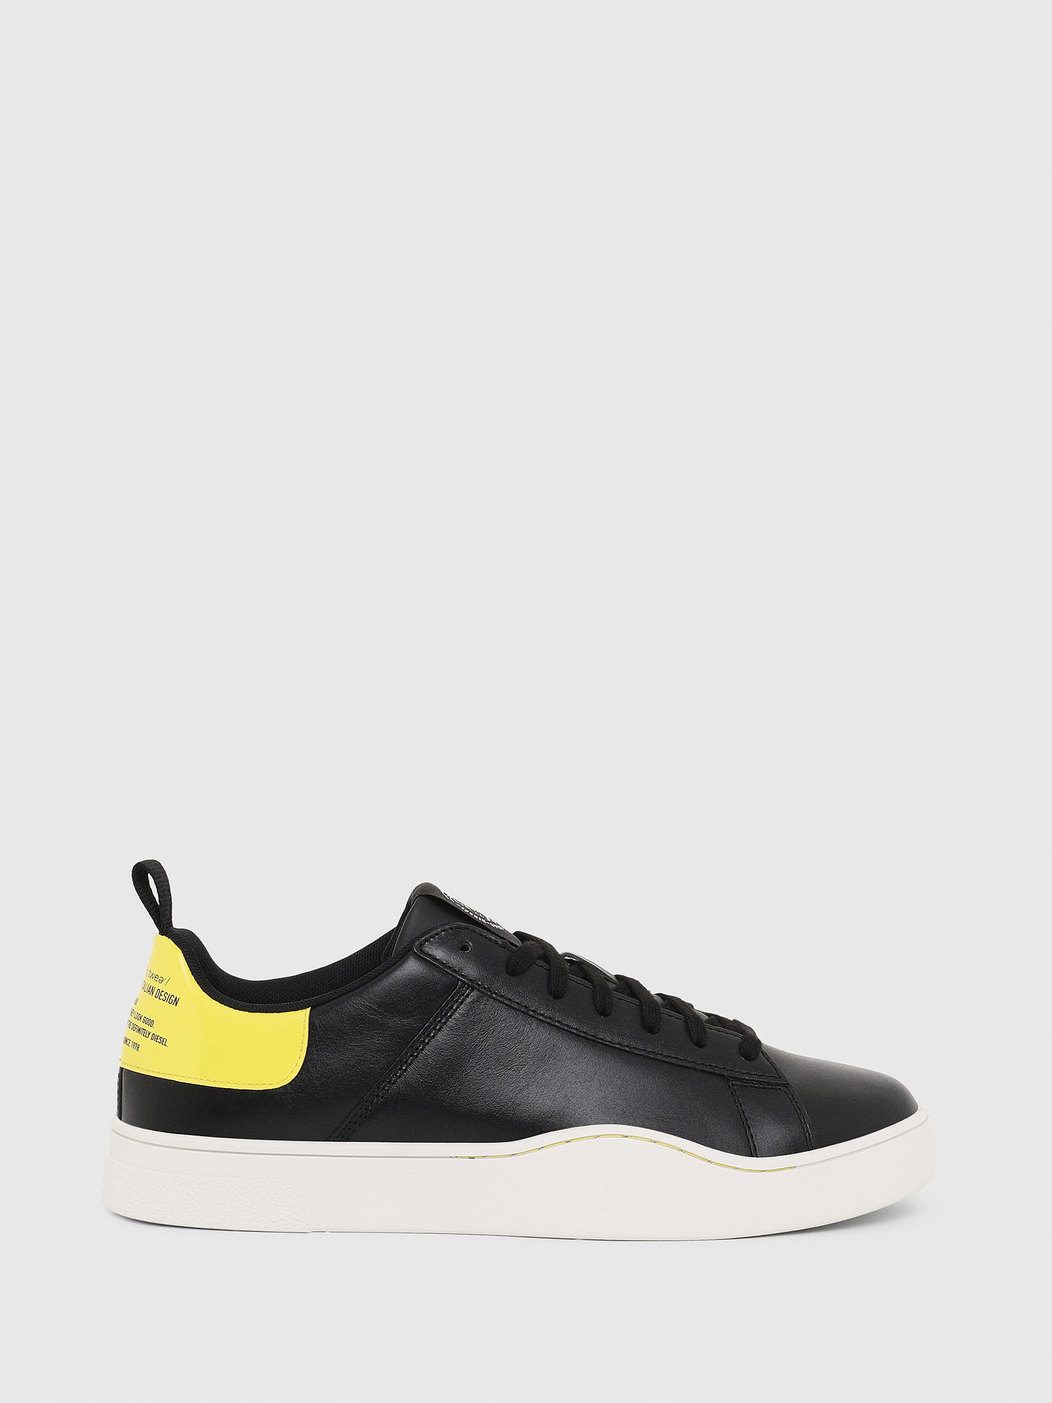 Low-Top Smooth Leather Sneakers